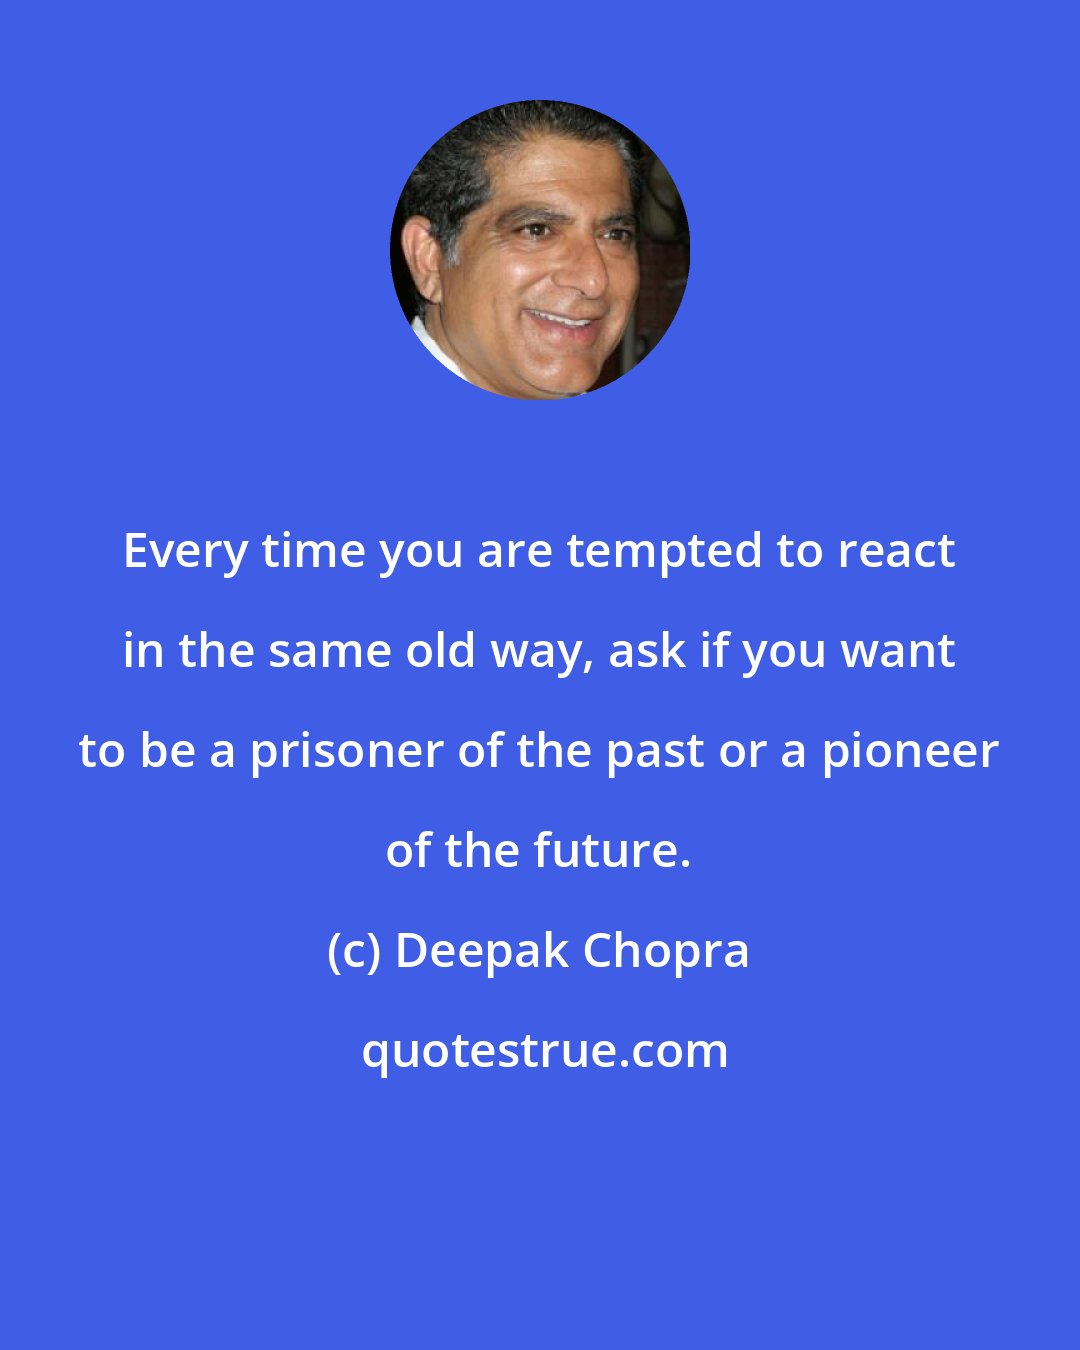 Deepak Chopra: Every time you are tempted to react in the same old way, ask if you want to be a prisoner of the past or a pioneer of the future.